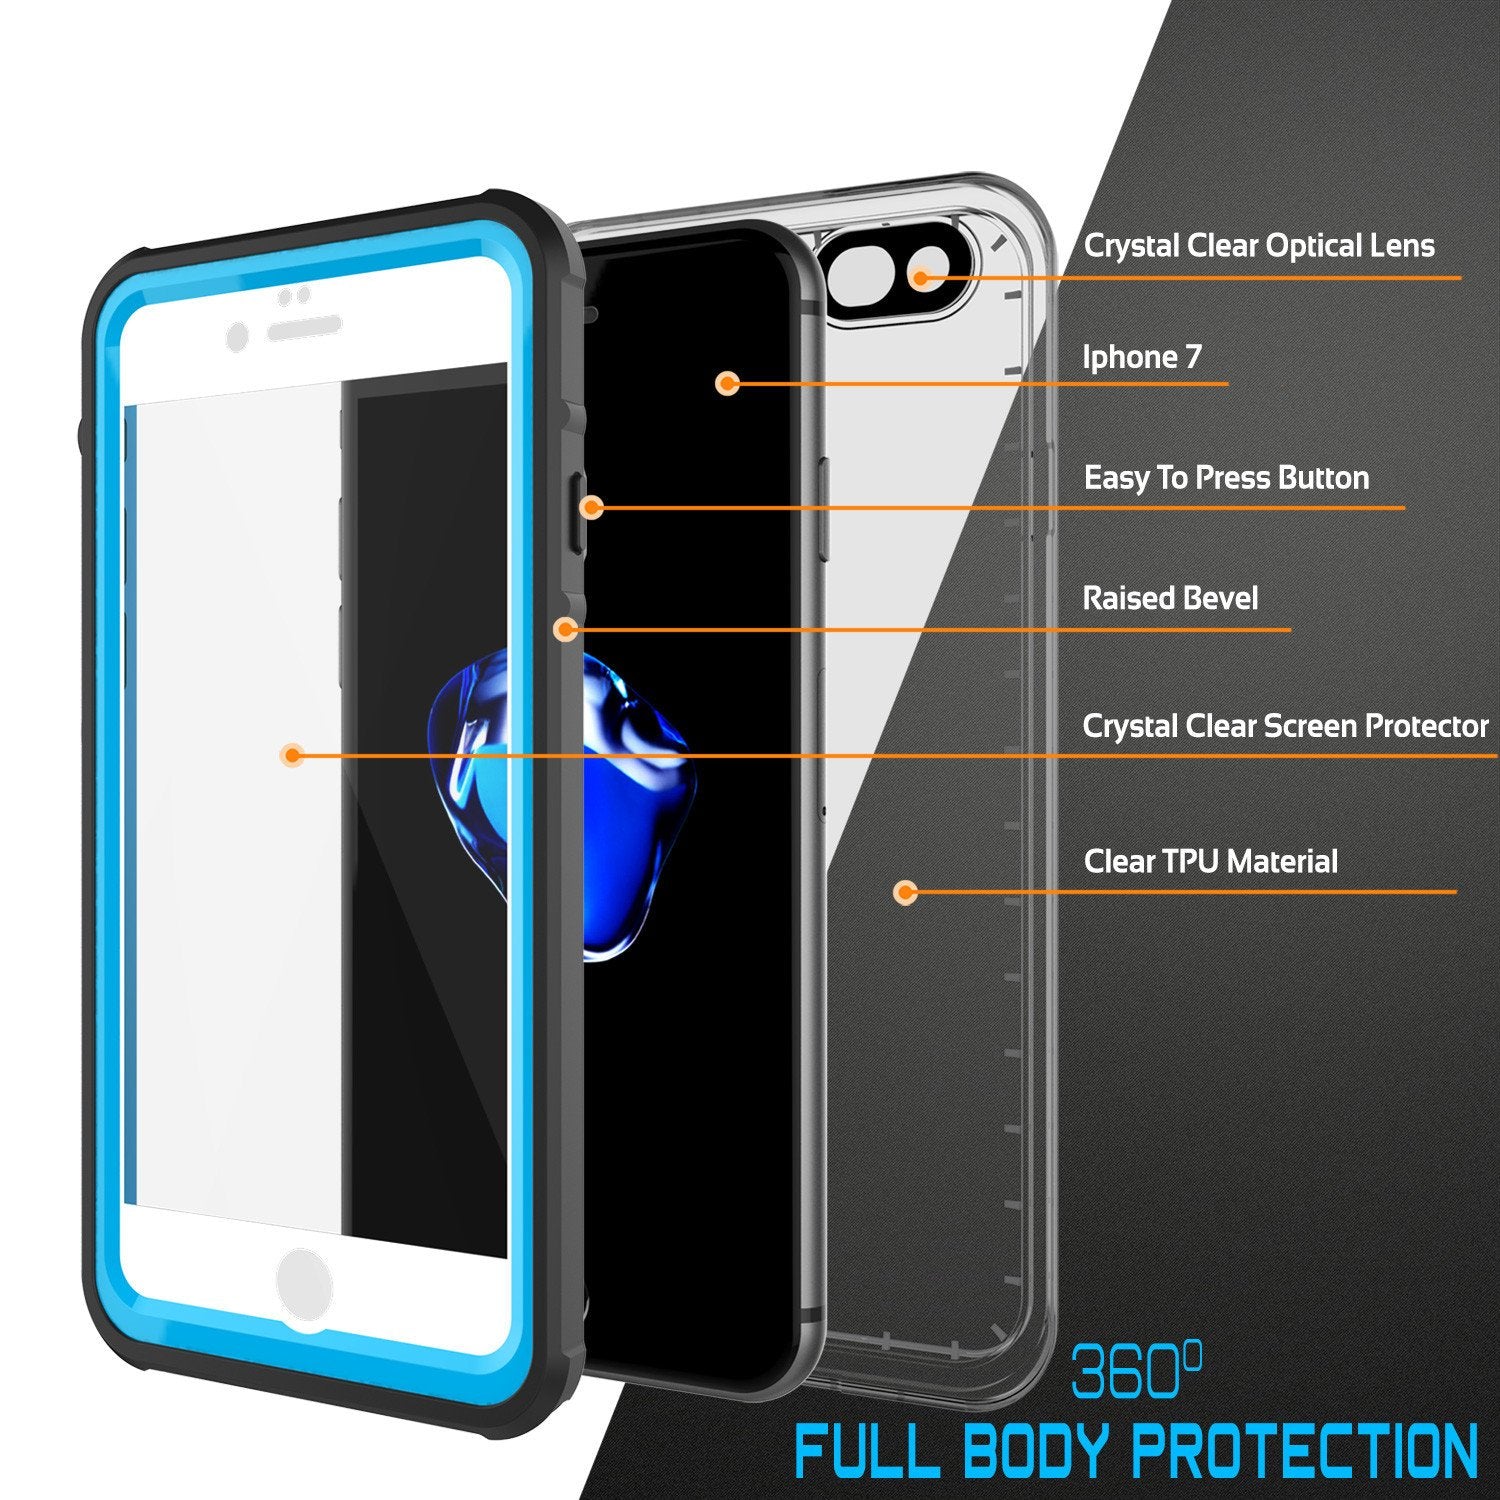 Apple iPhone 7 Waterproof Case, PUNKcase CRYSTAL Light Blue  W/ Attached Screen Protector  | Warranty